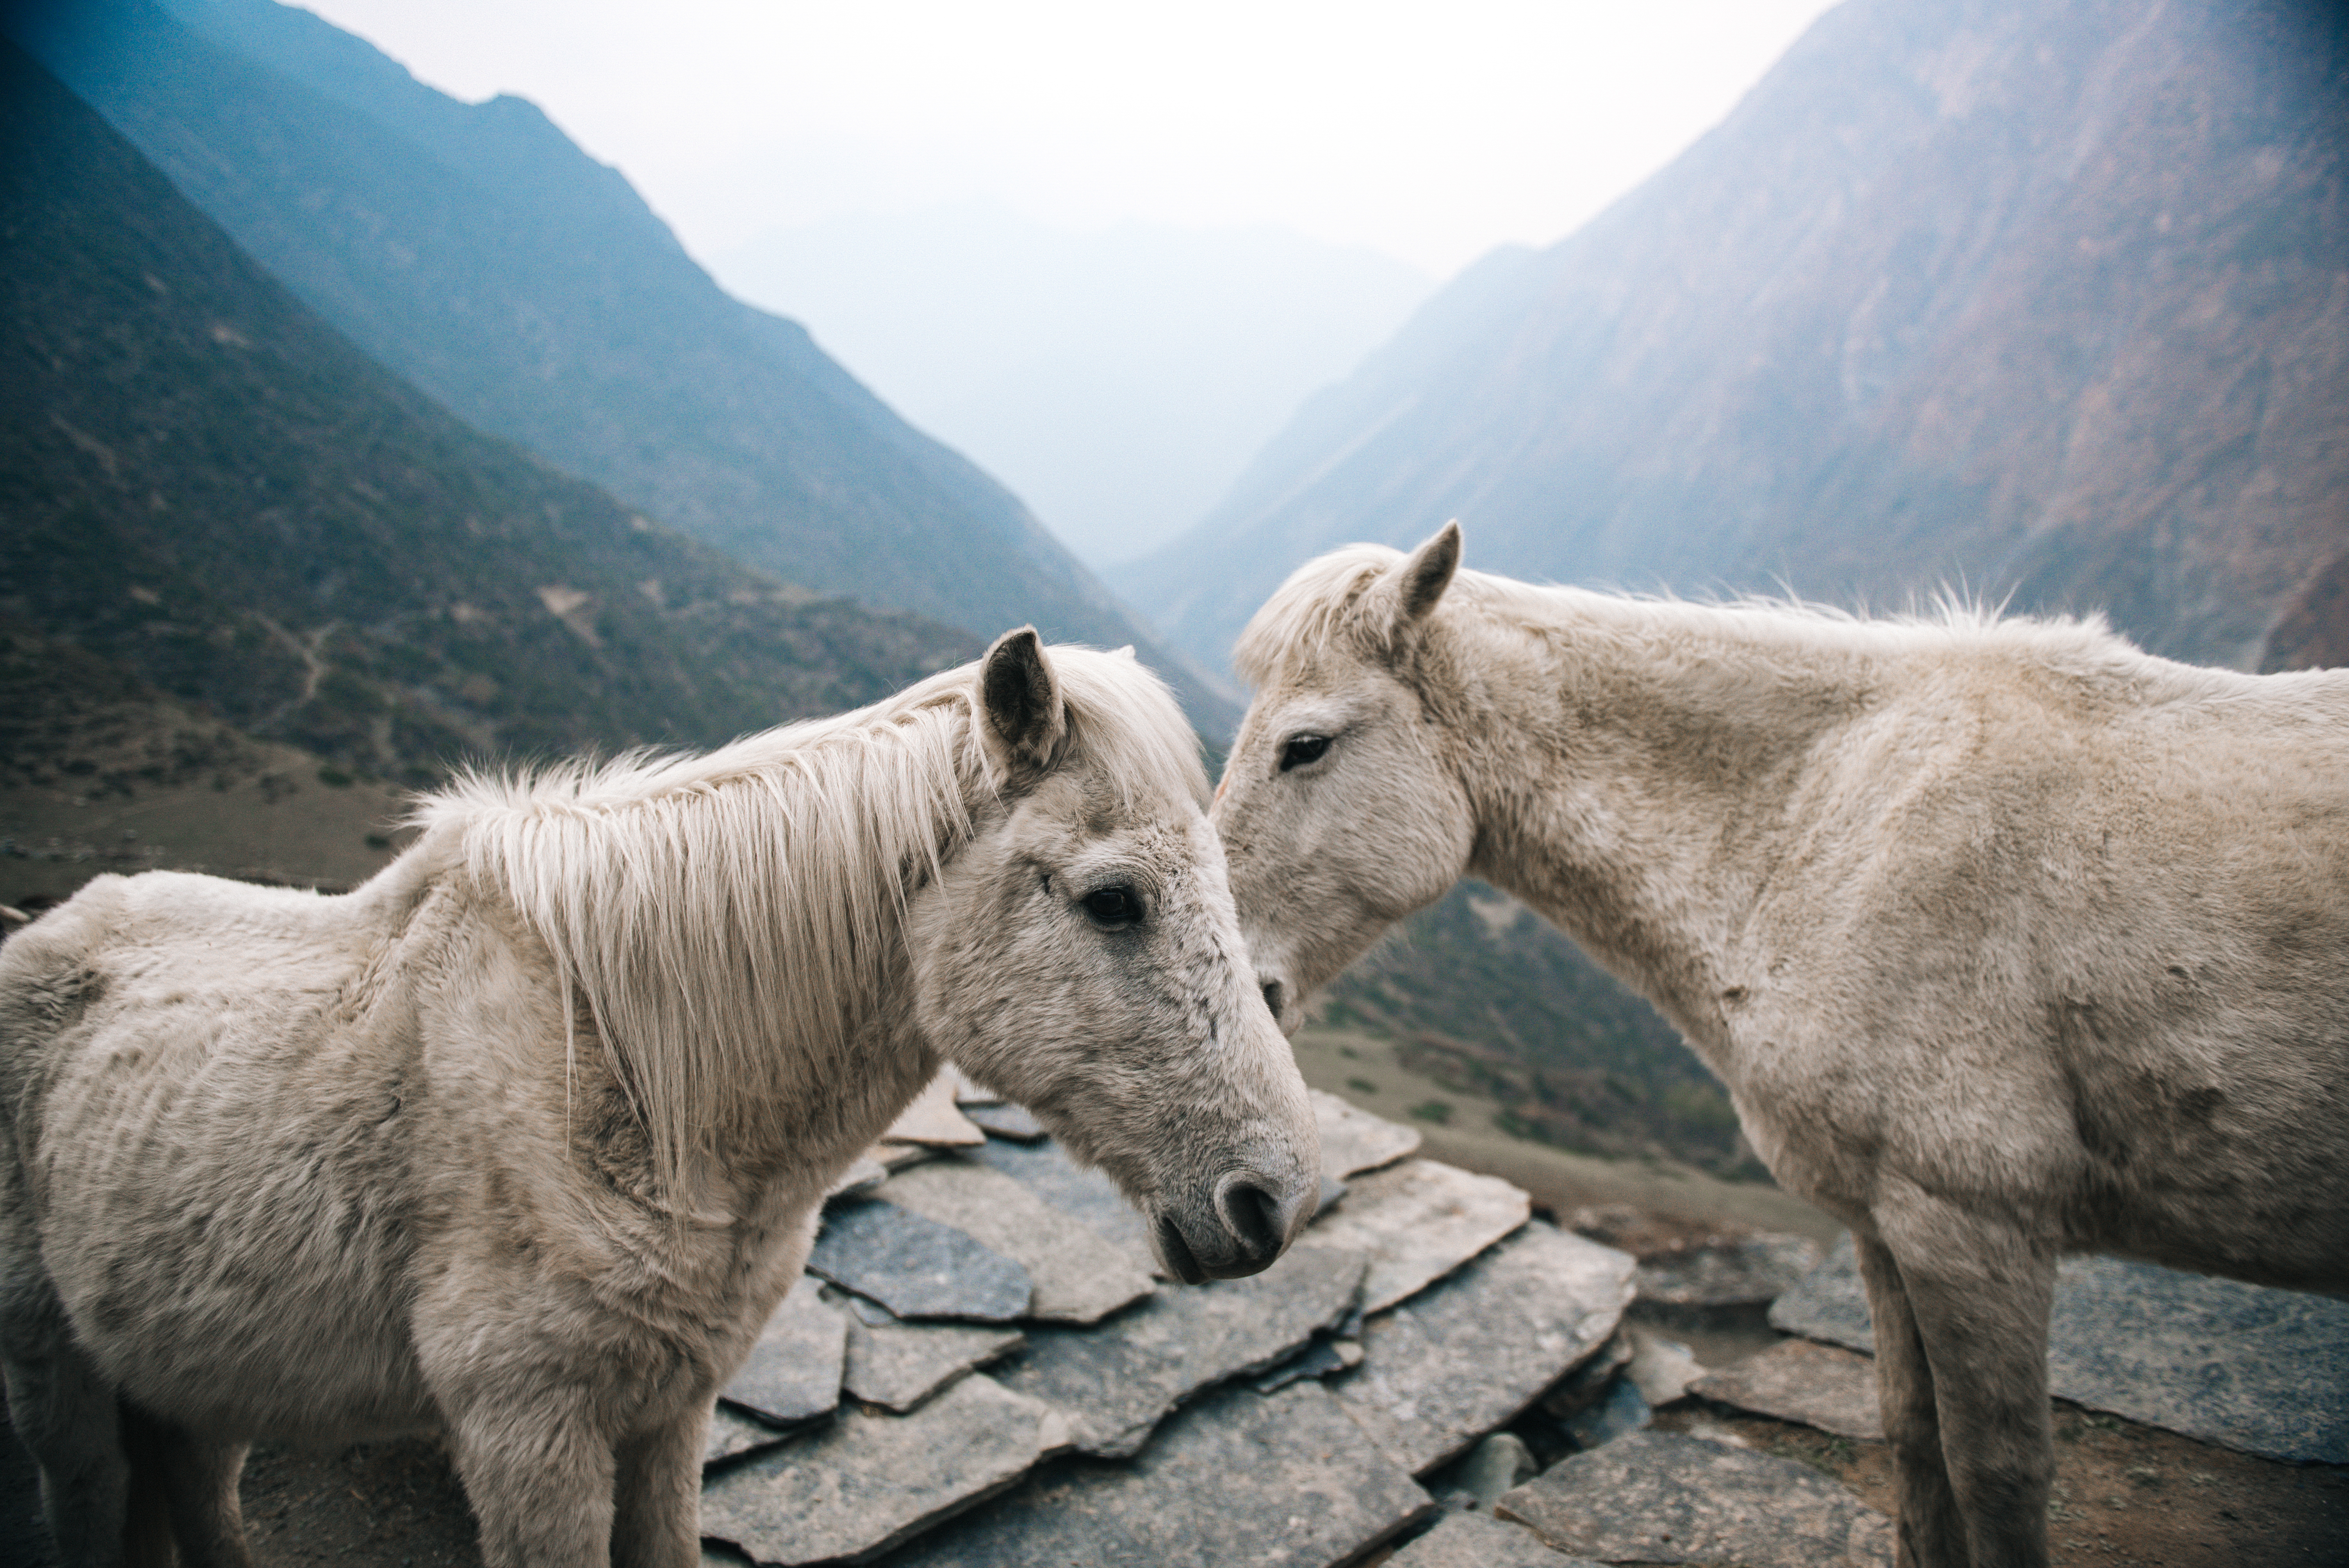 White horses rest after a hard days climb - Tsum Valley.